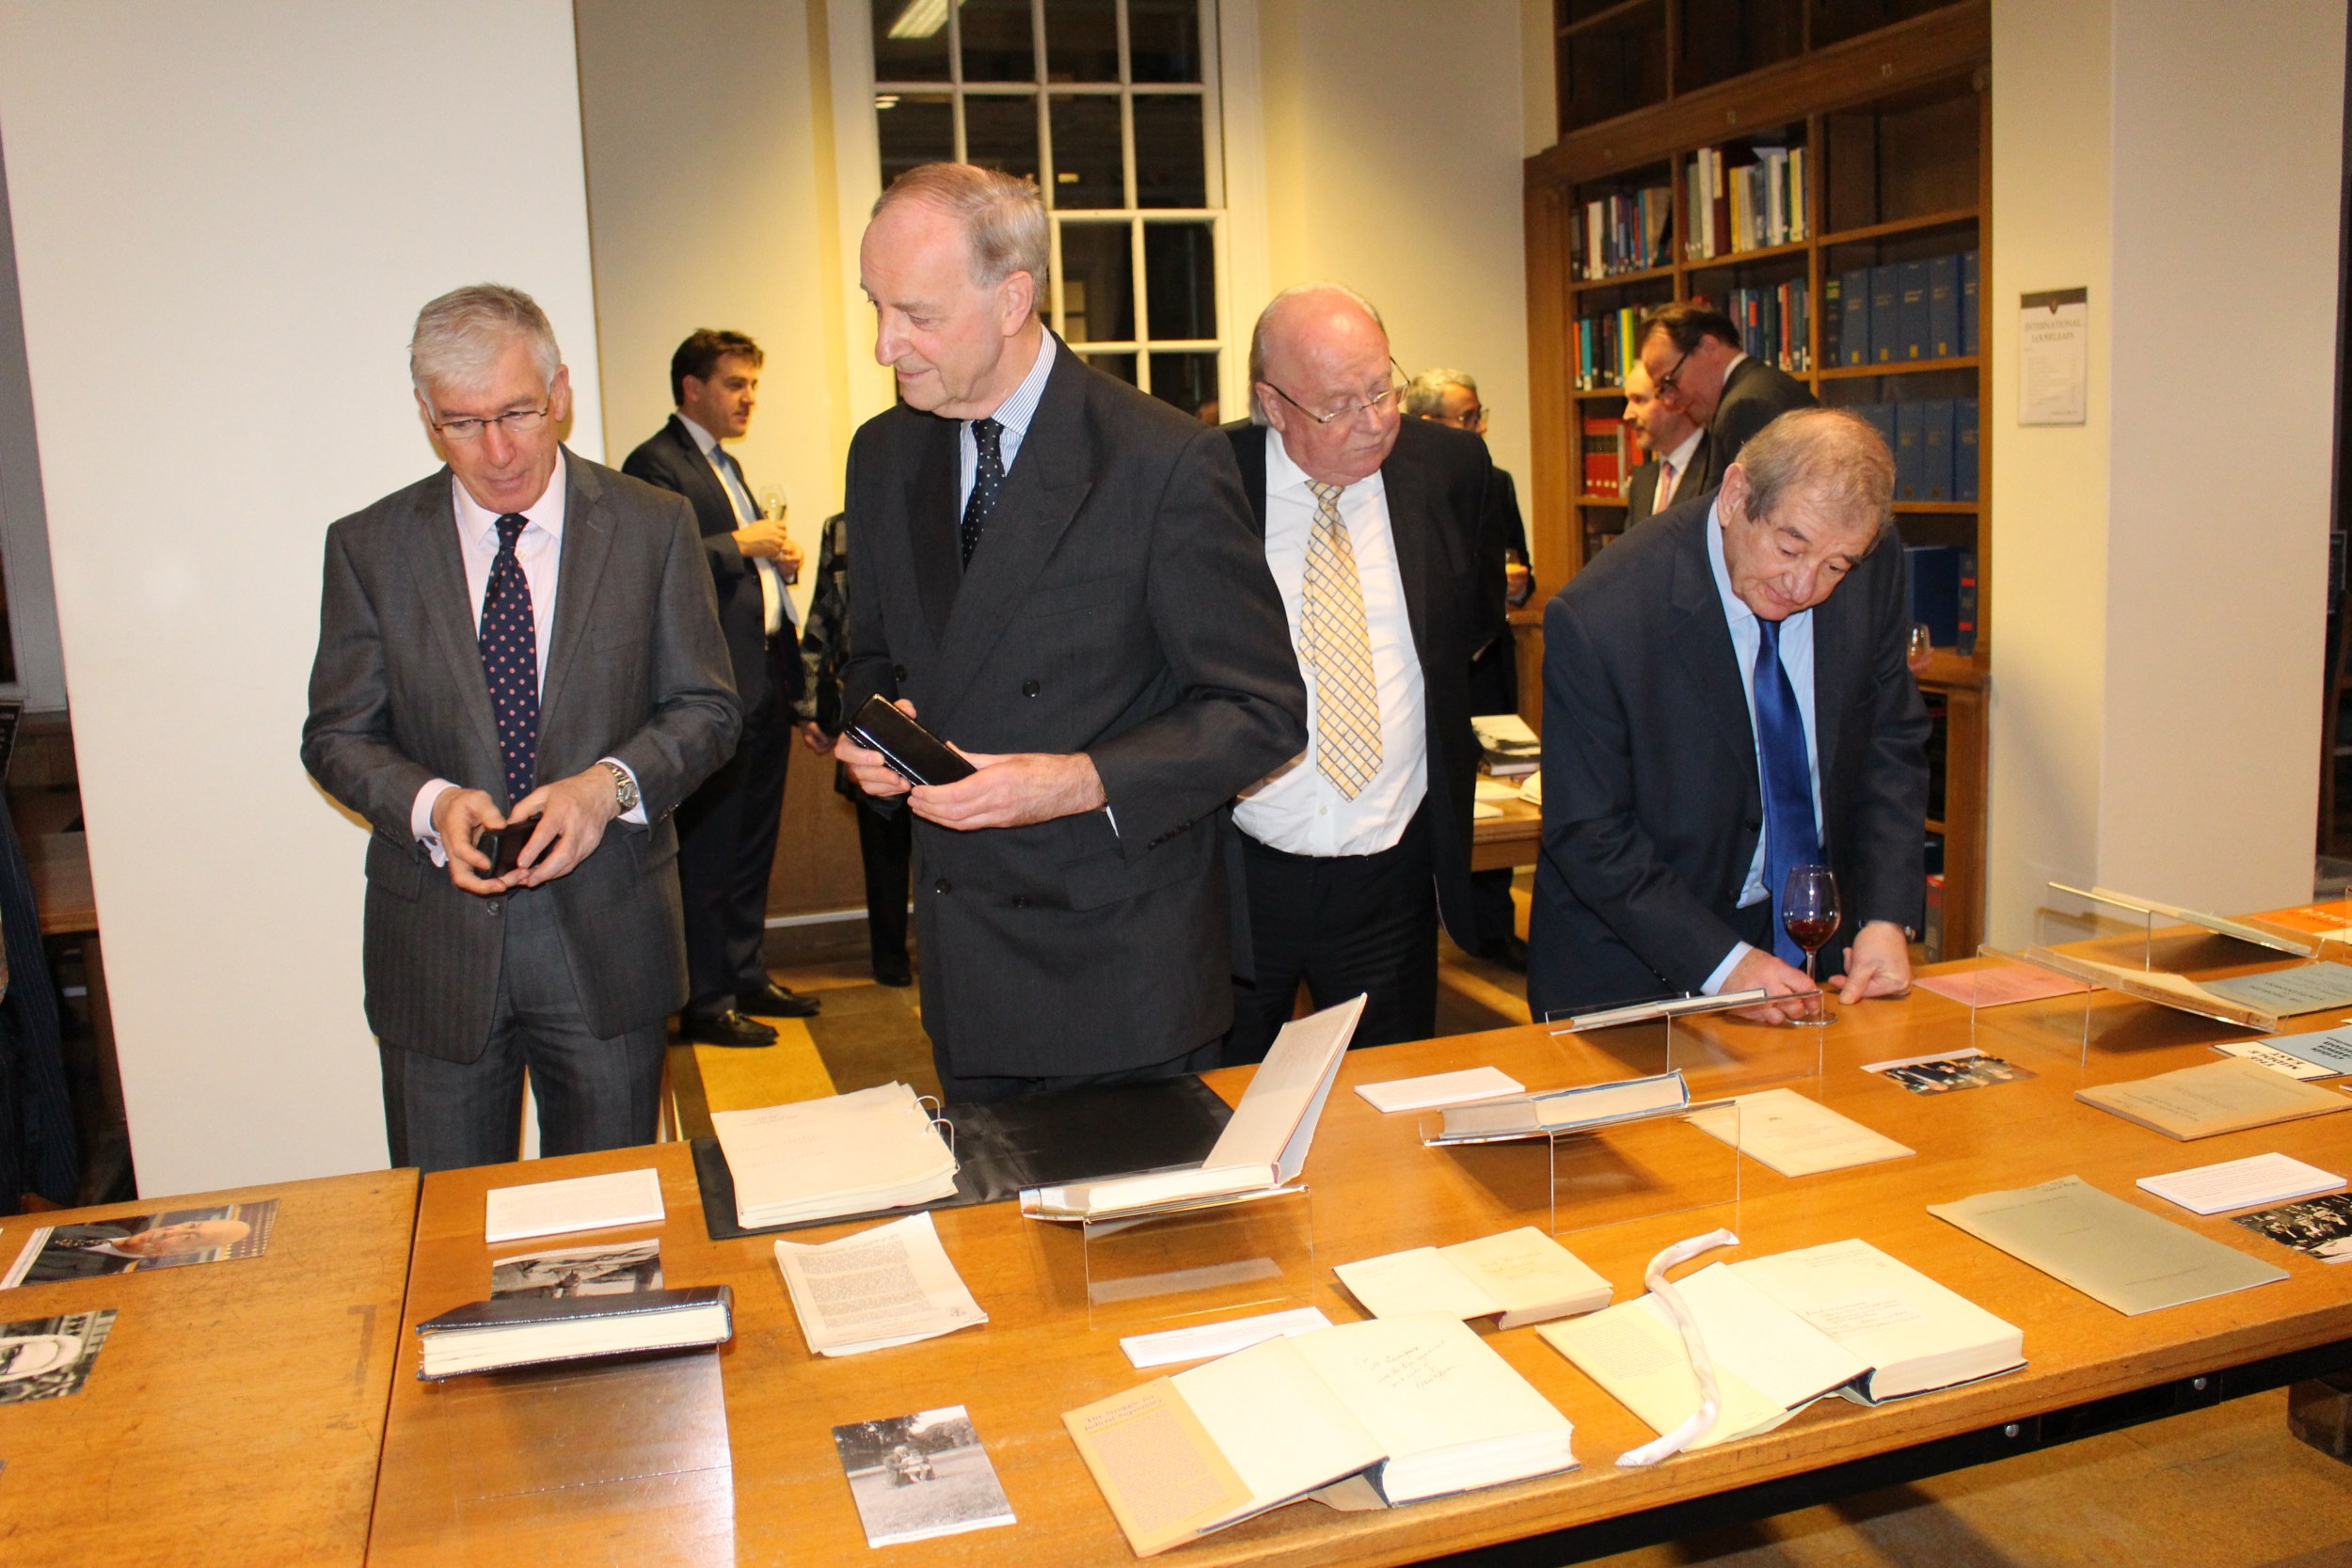 The Treasurer of Gray's Inn Master David Foskett with Under Treasurer Tony Harking and guests viewing the Lauterpacht exhibition at Gray's Inn Library